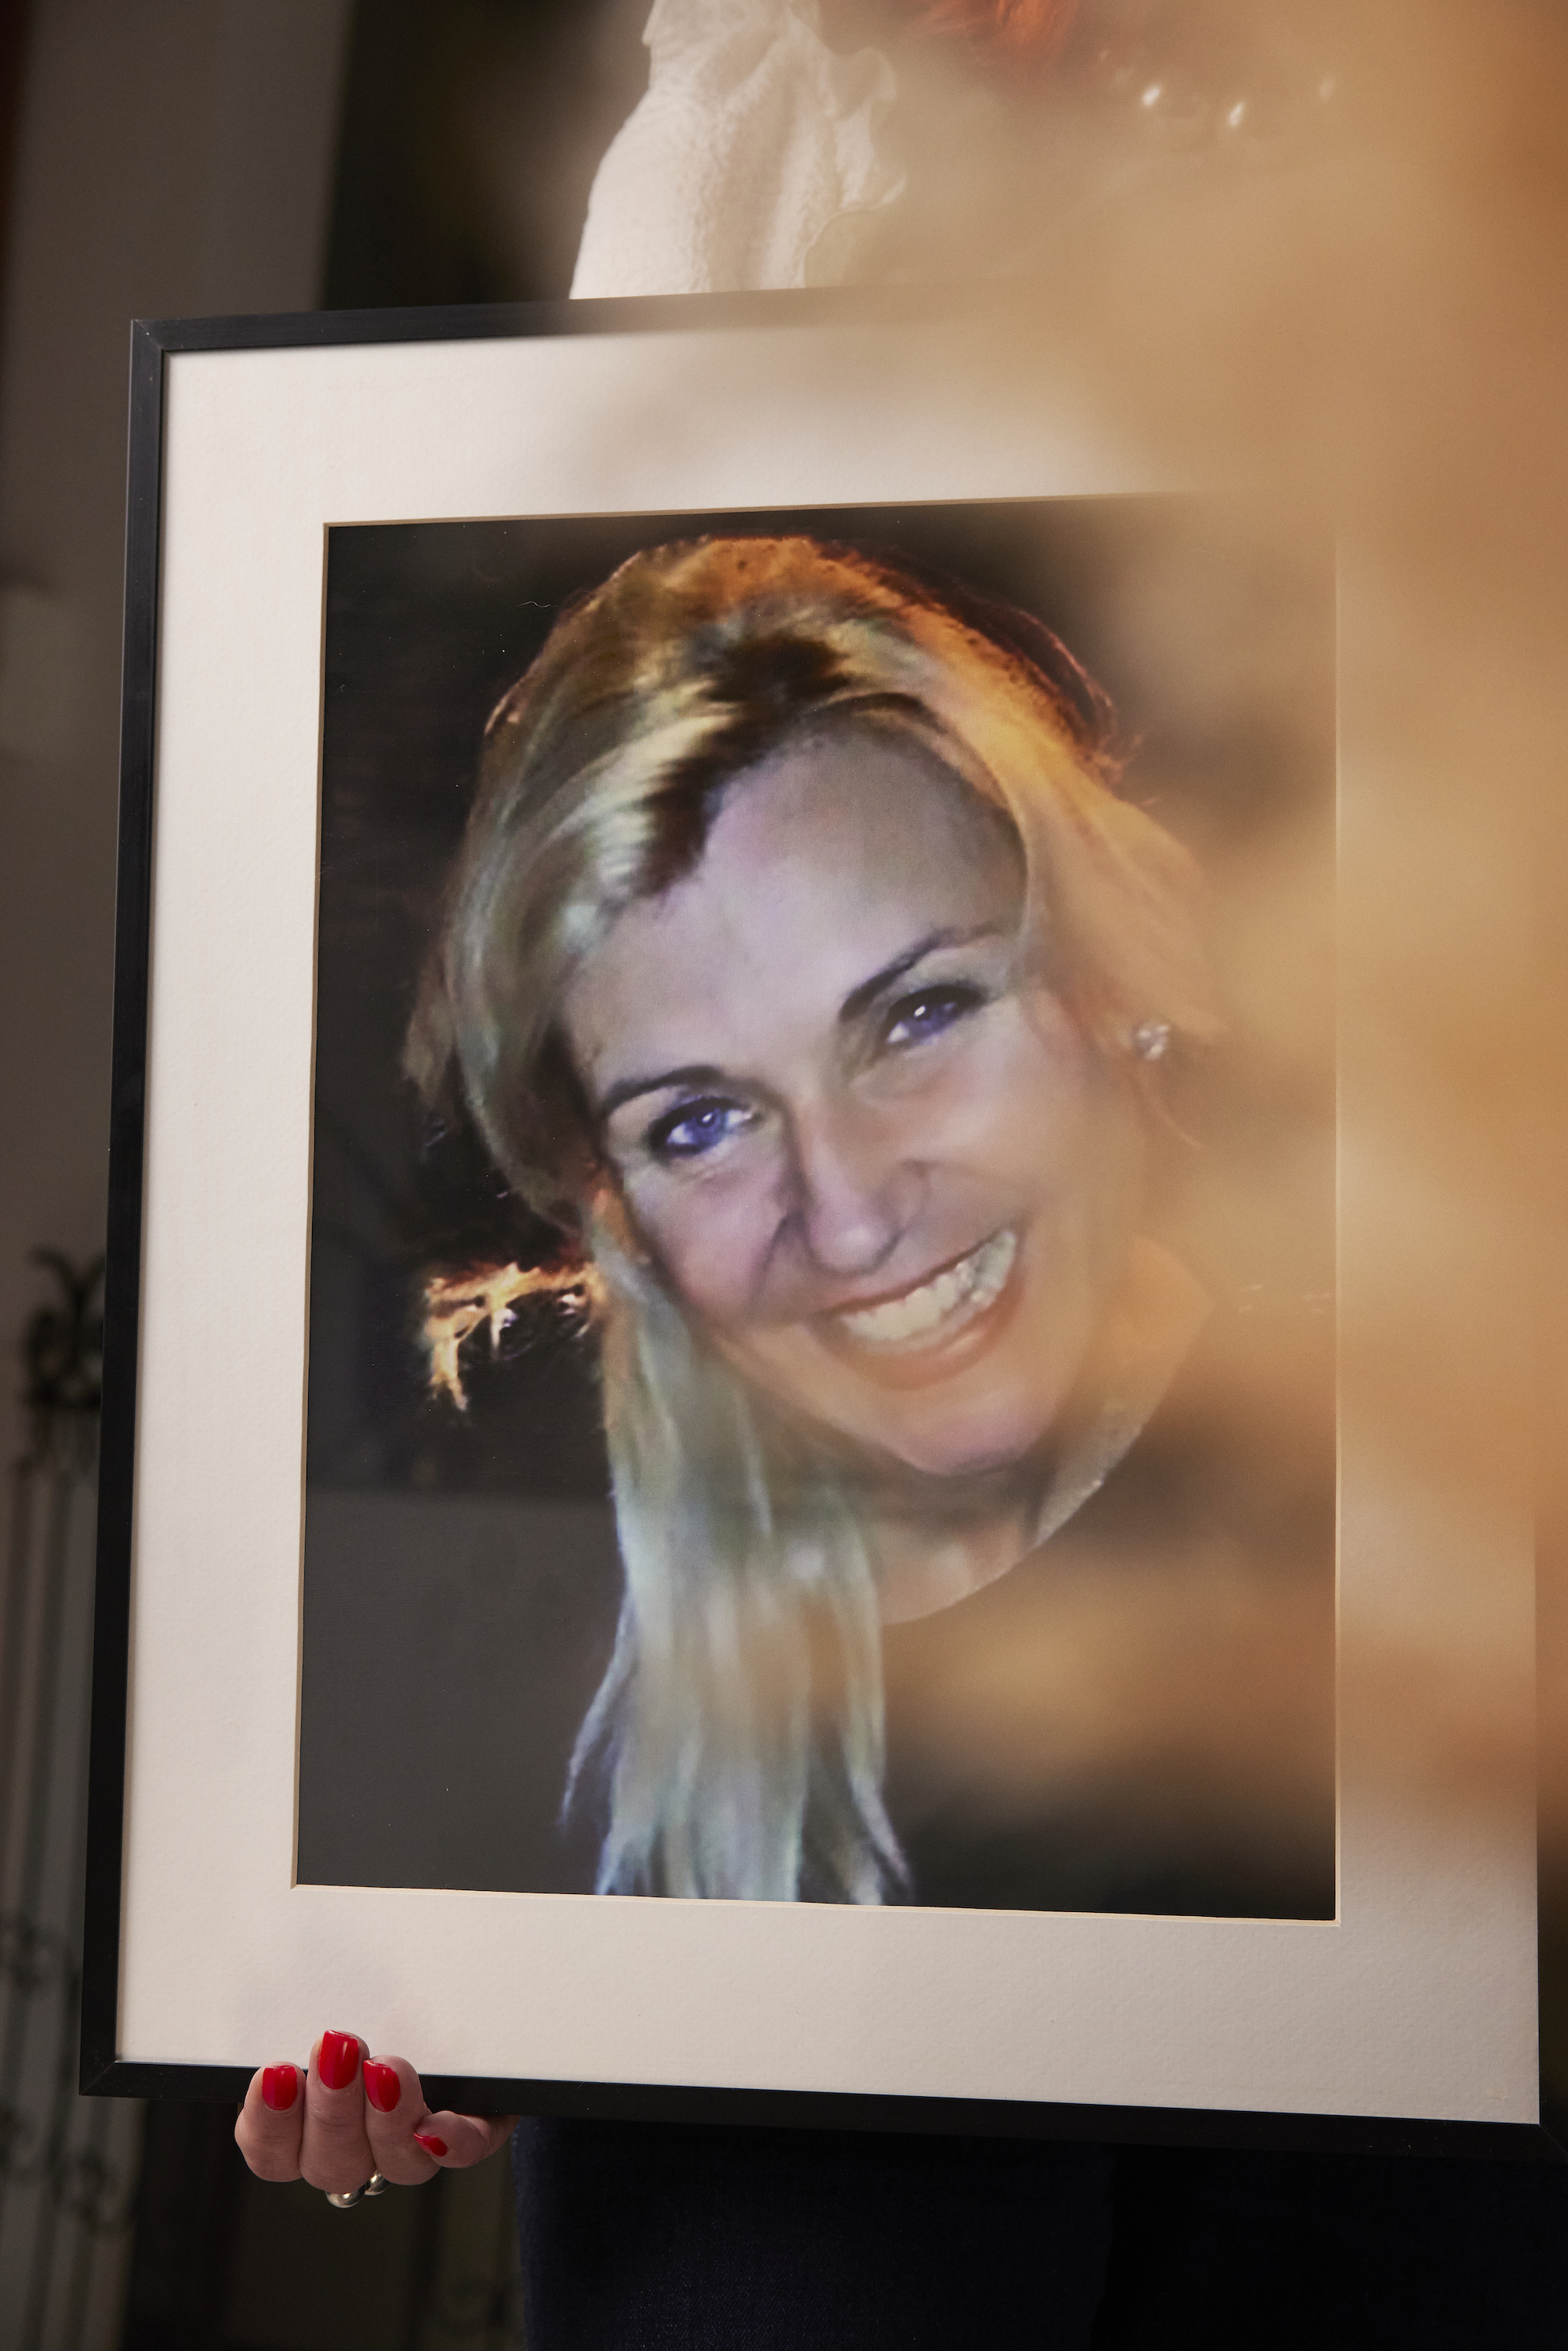 photo of a picture of a blond girl in a frame. The girl has long hair and smiles and the camera, and the frame is held by hands with red nail polish